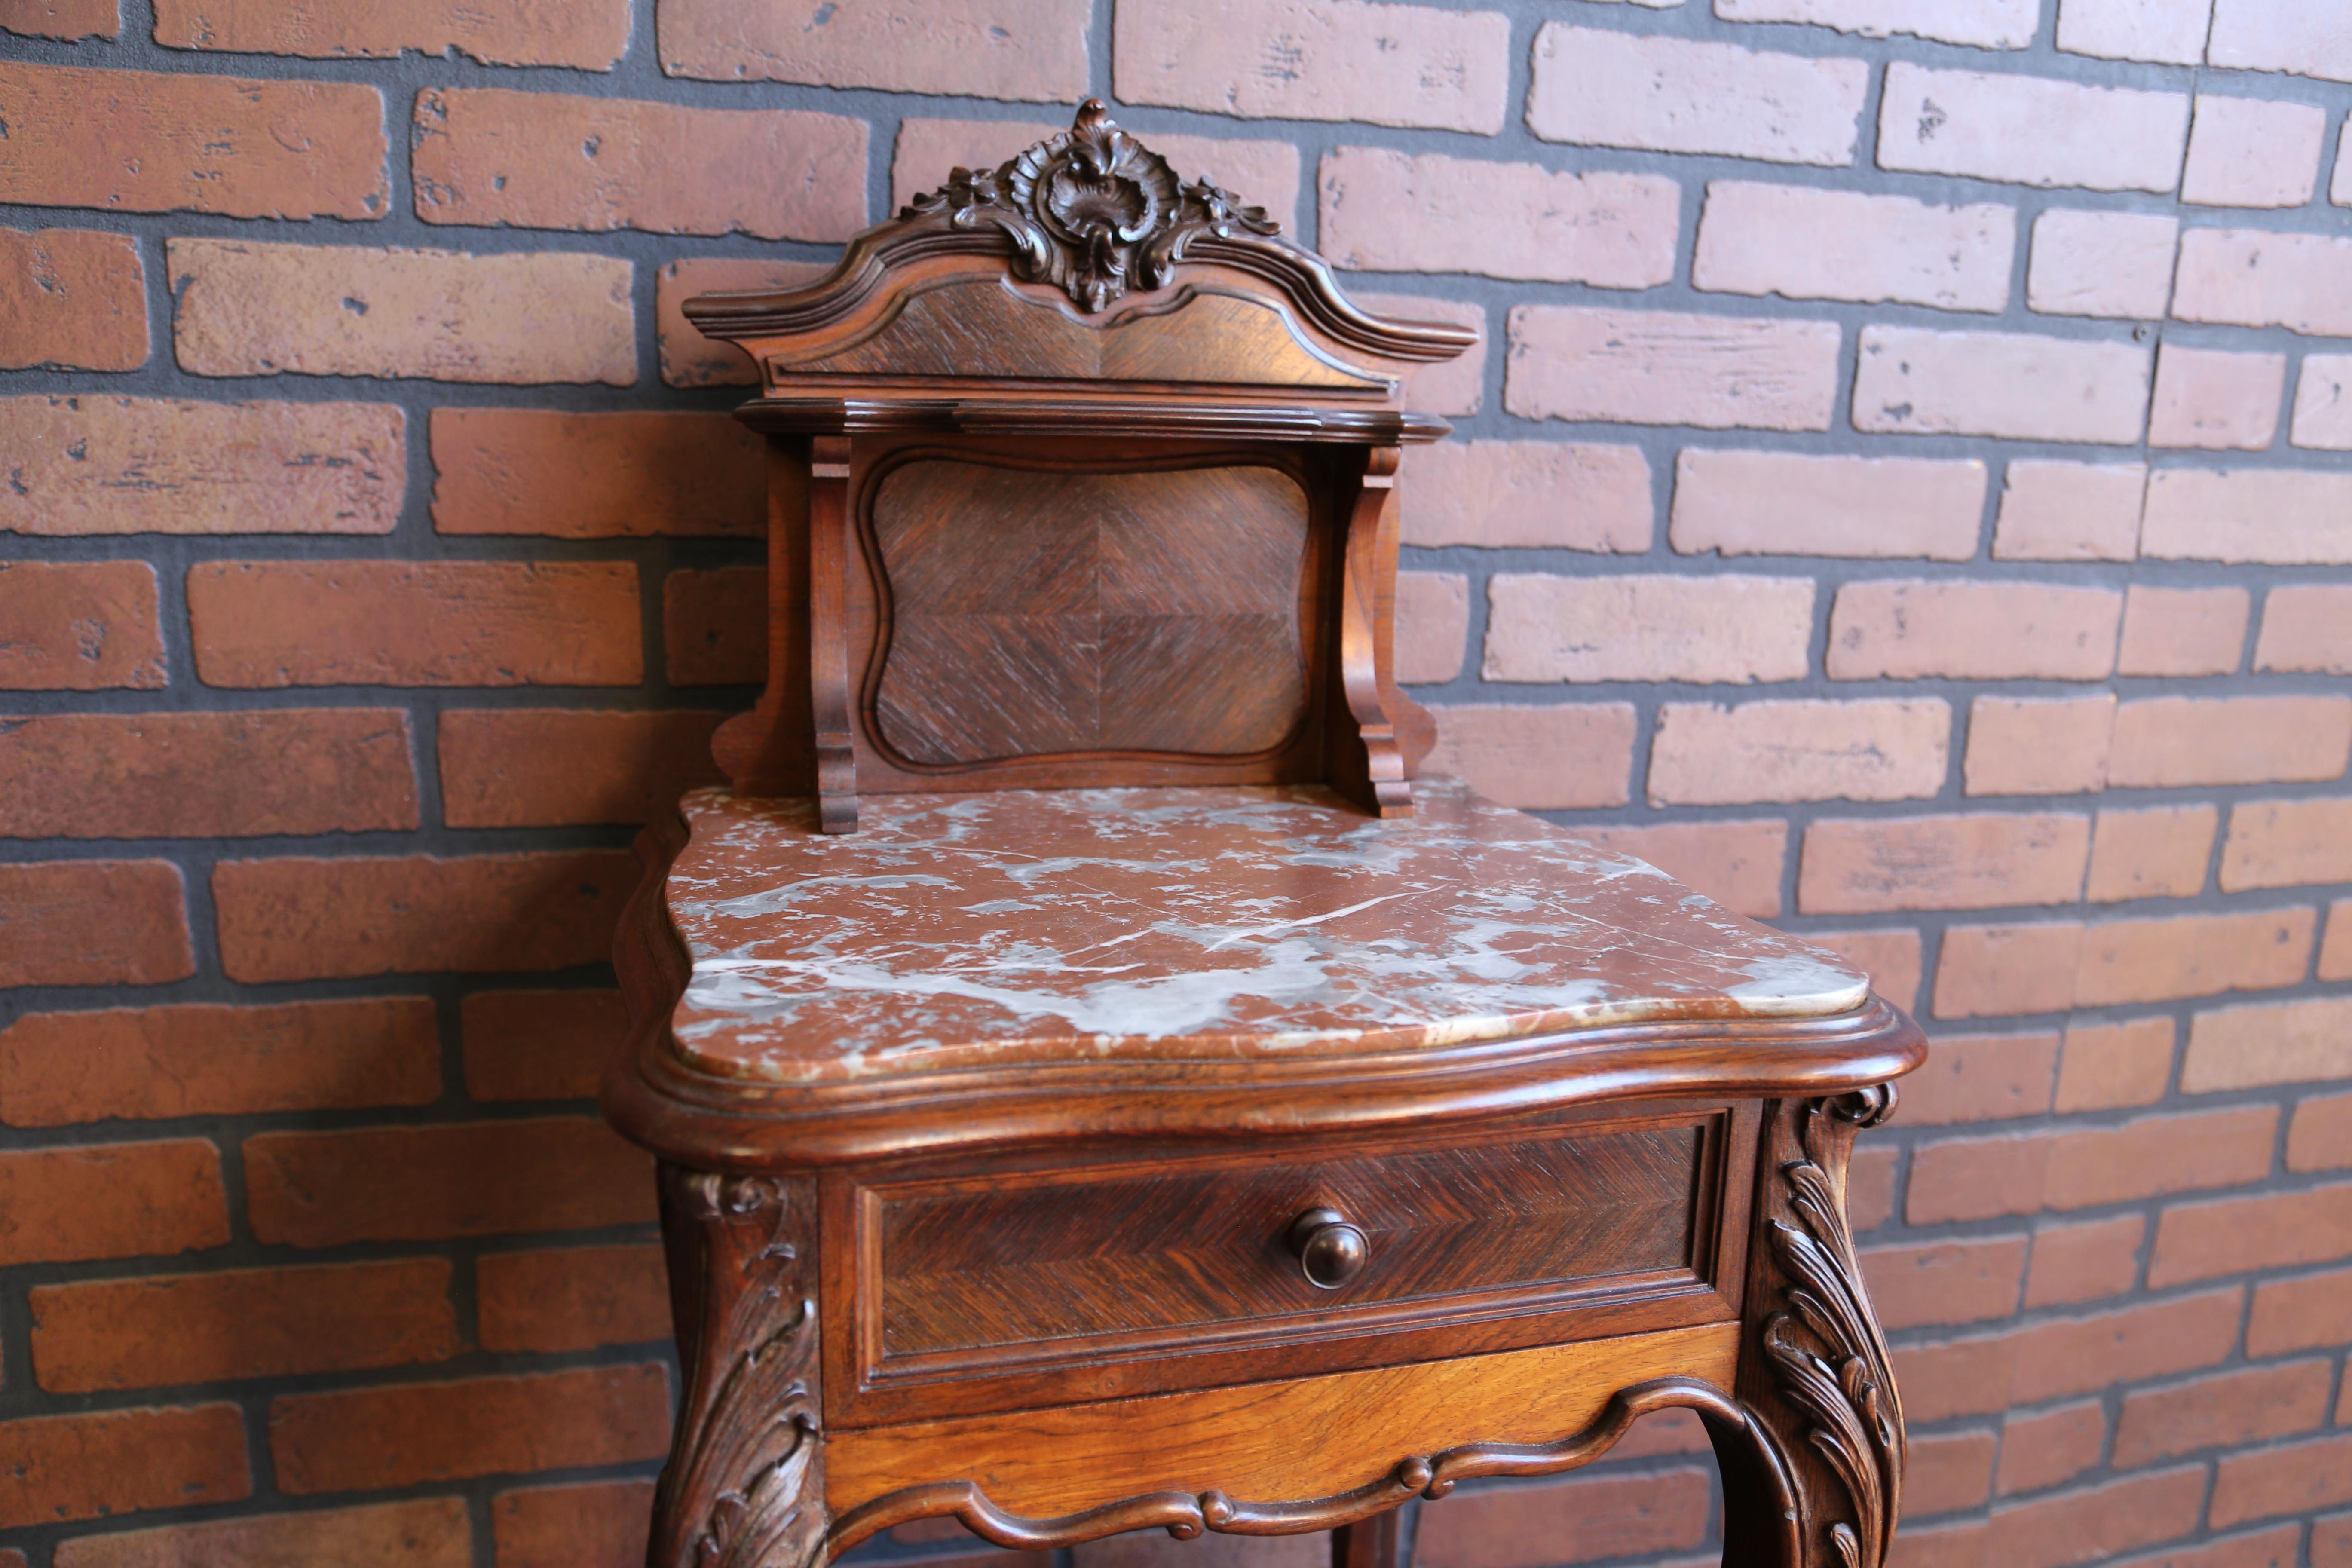 Antique French nightstand with marble top. This nightstand is oh so sweet. The carved pediment adorning the top of rococo back splash is the perfect crowning touch. Love the unique design featuring shapely legs connecting the top to the marble lined